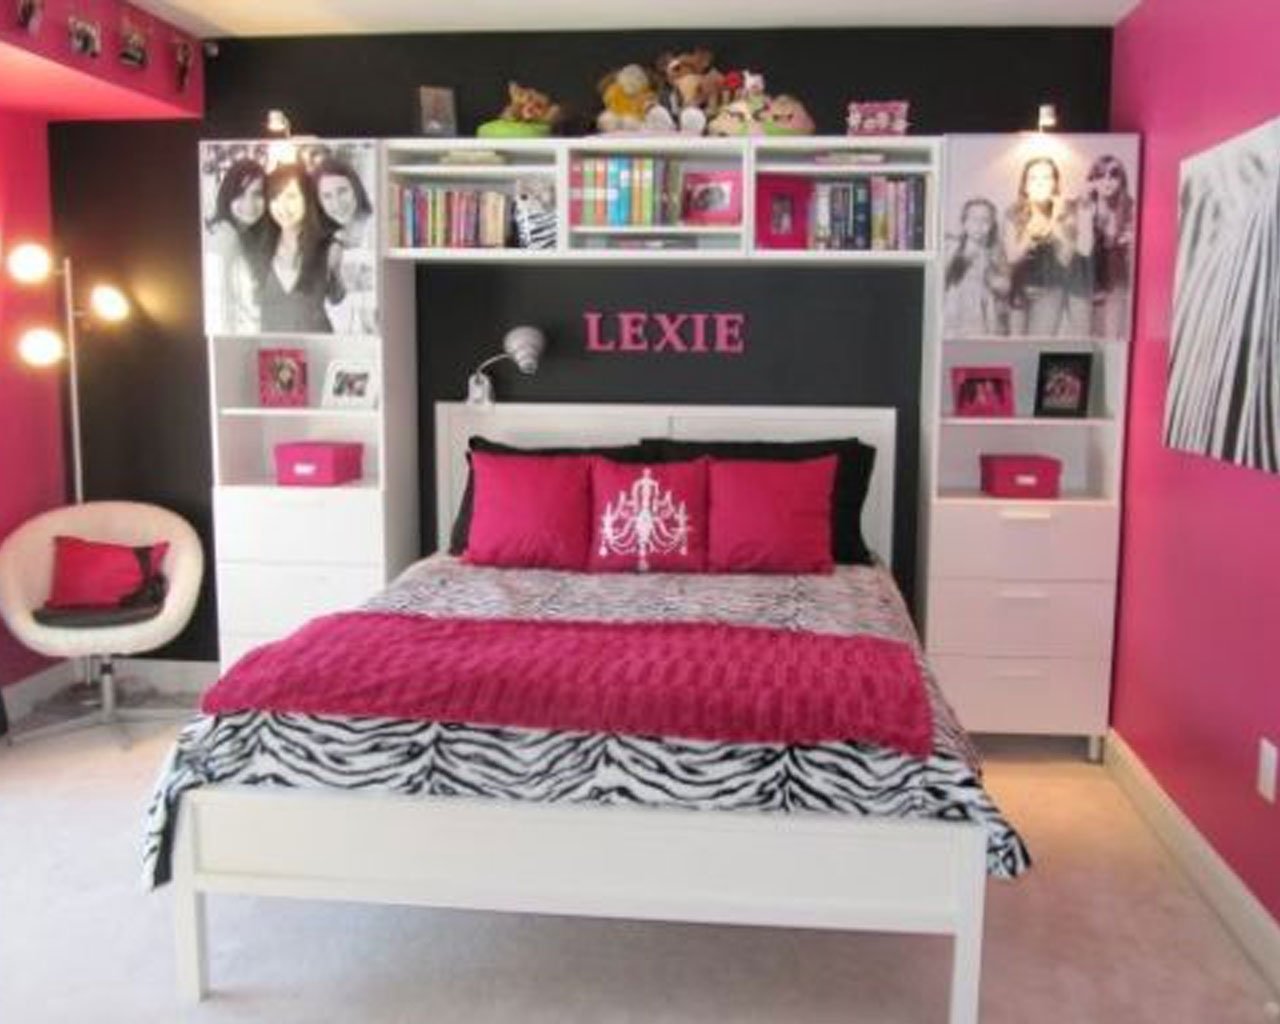 10 Most Recommended Pink Black And White Room Ideas black white pink bedroom idea decobizz 2 2022